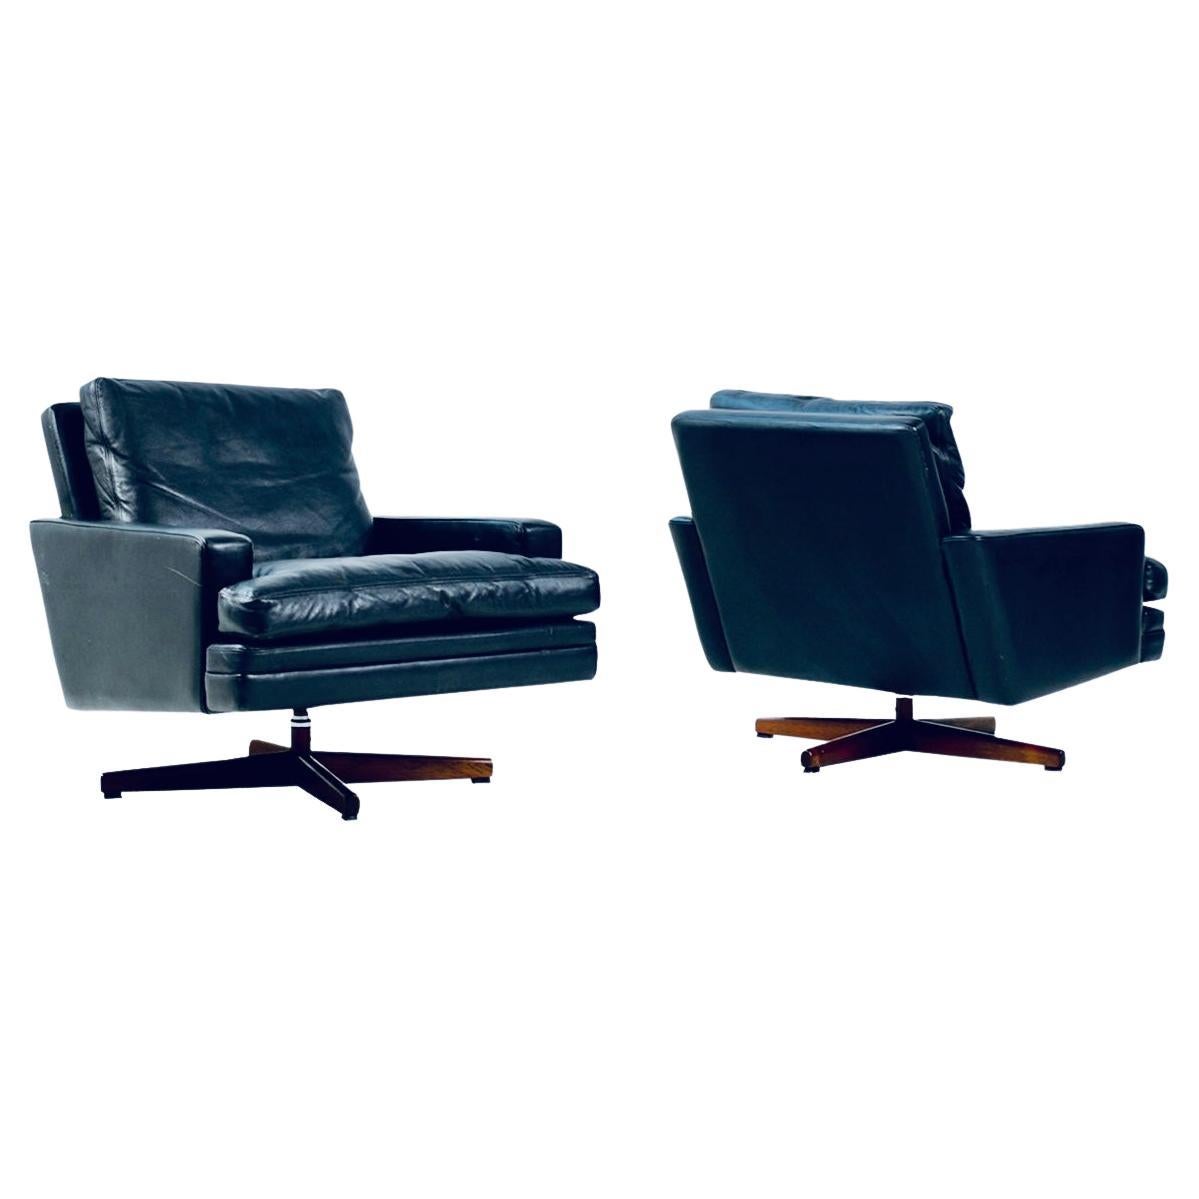 Rare Pair of Black Leather Lounge Chairs by Fredrik A. Kayser for Vatne Mod. 807